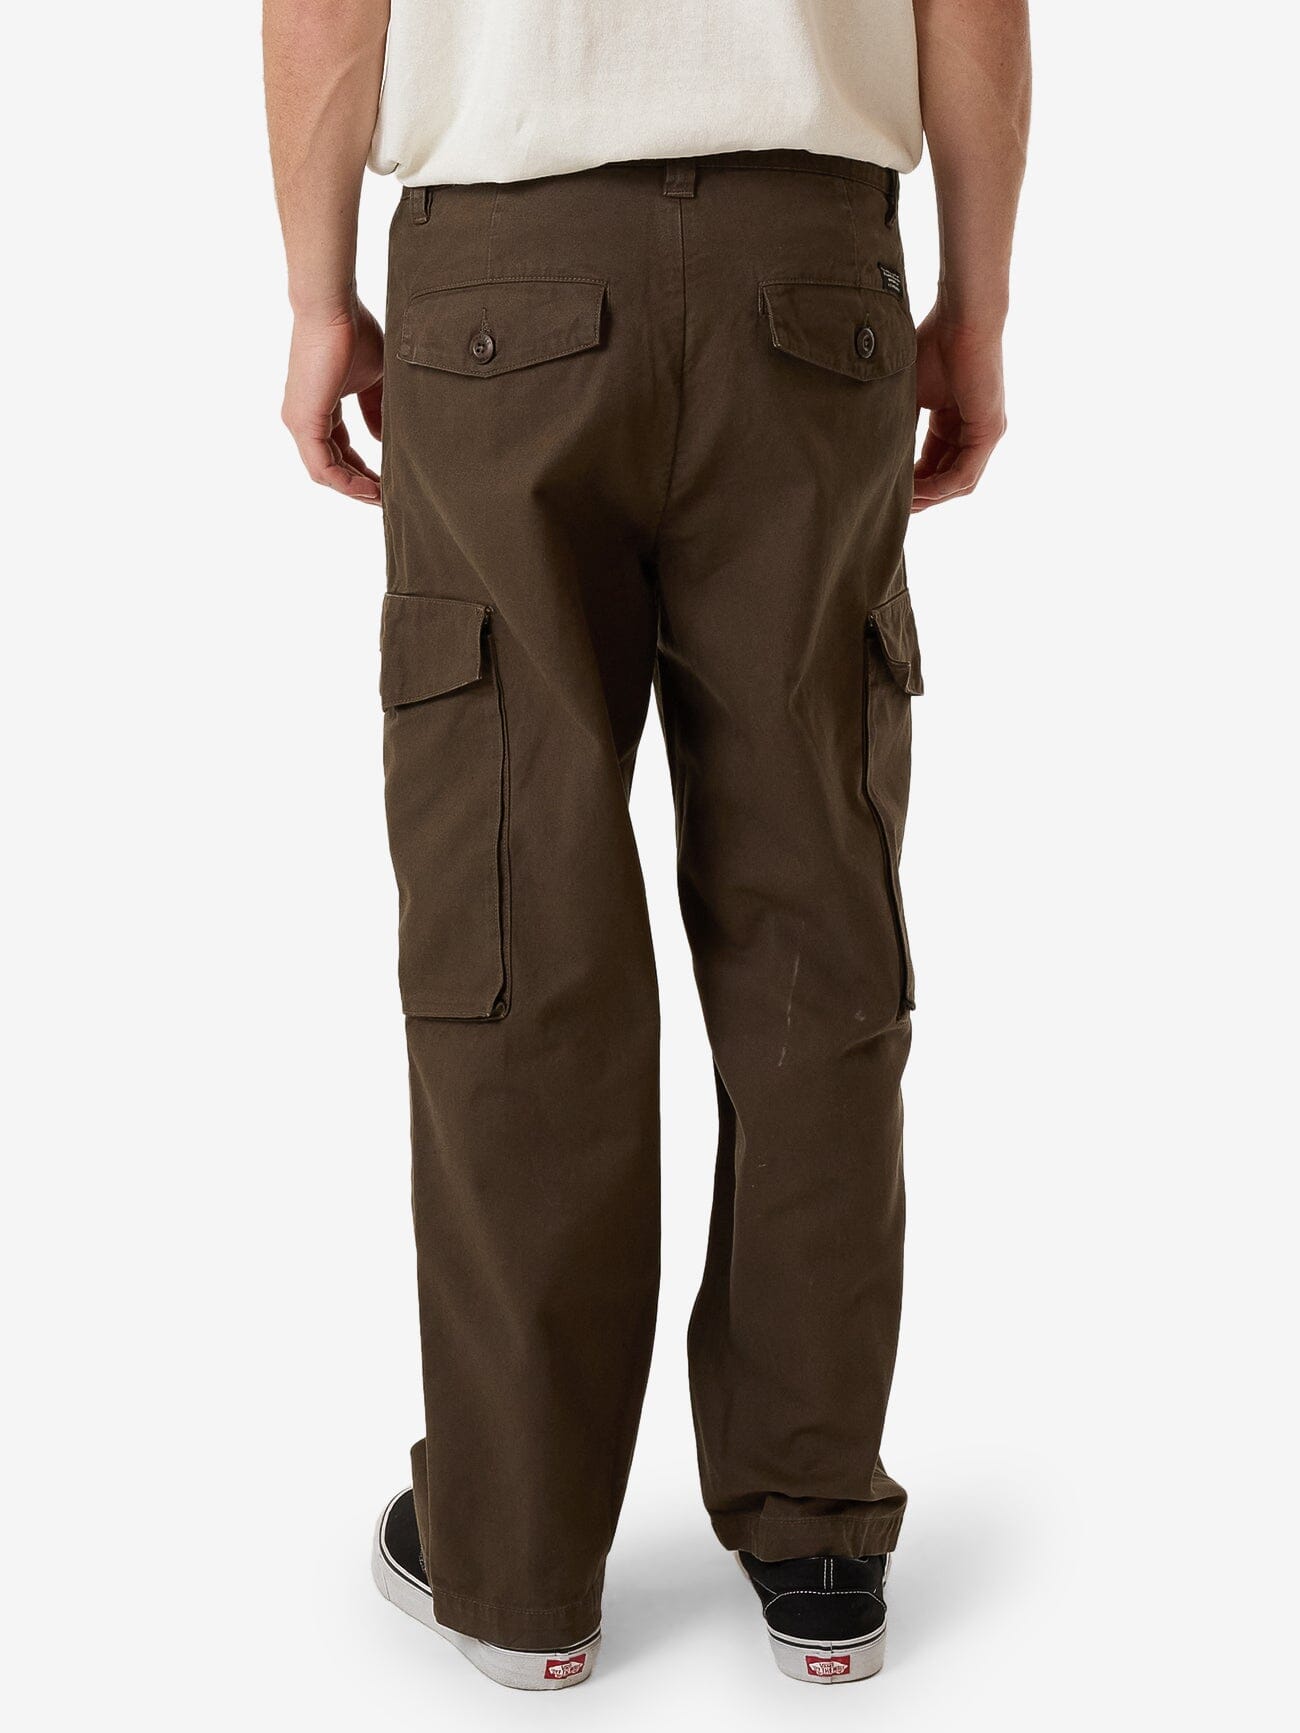 Issued Big Slacker Cargo Pant - Canteen